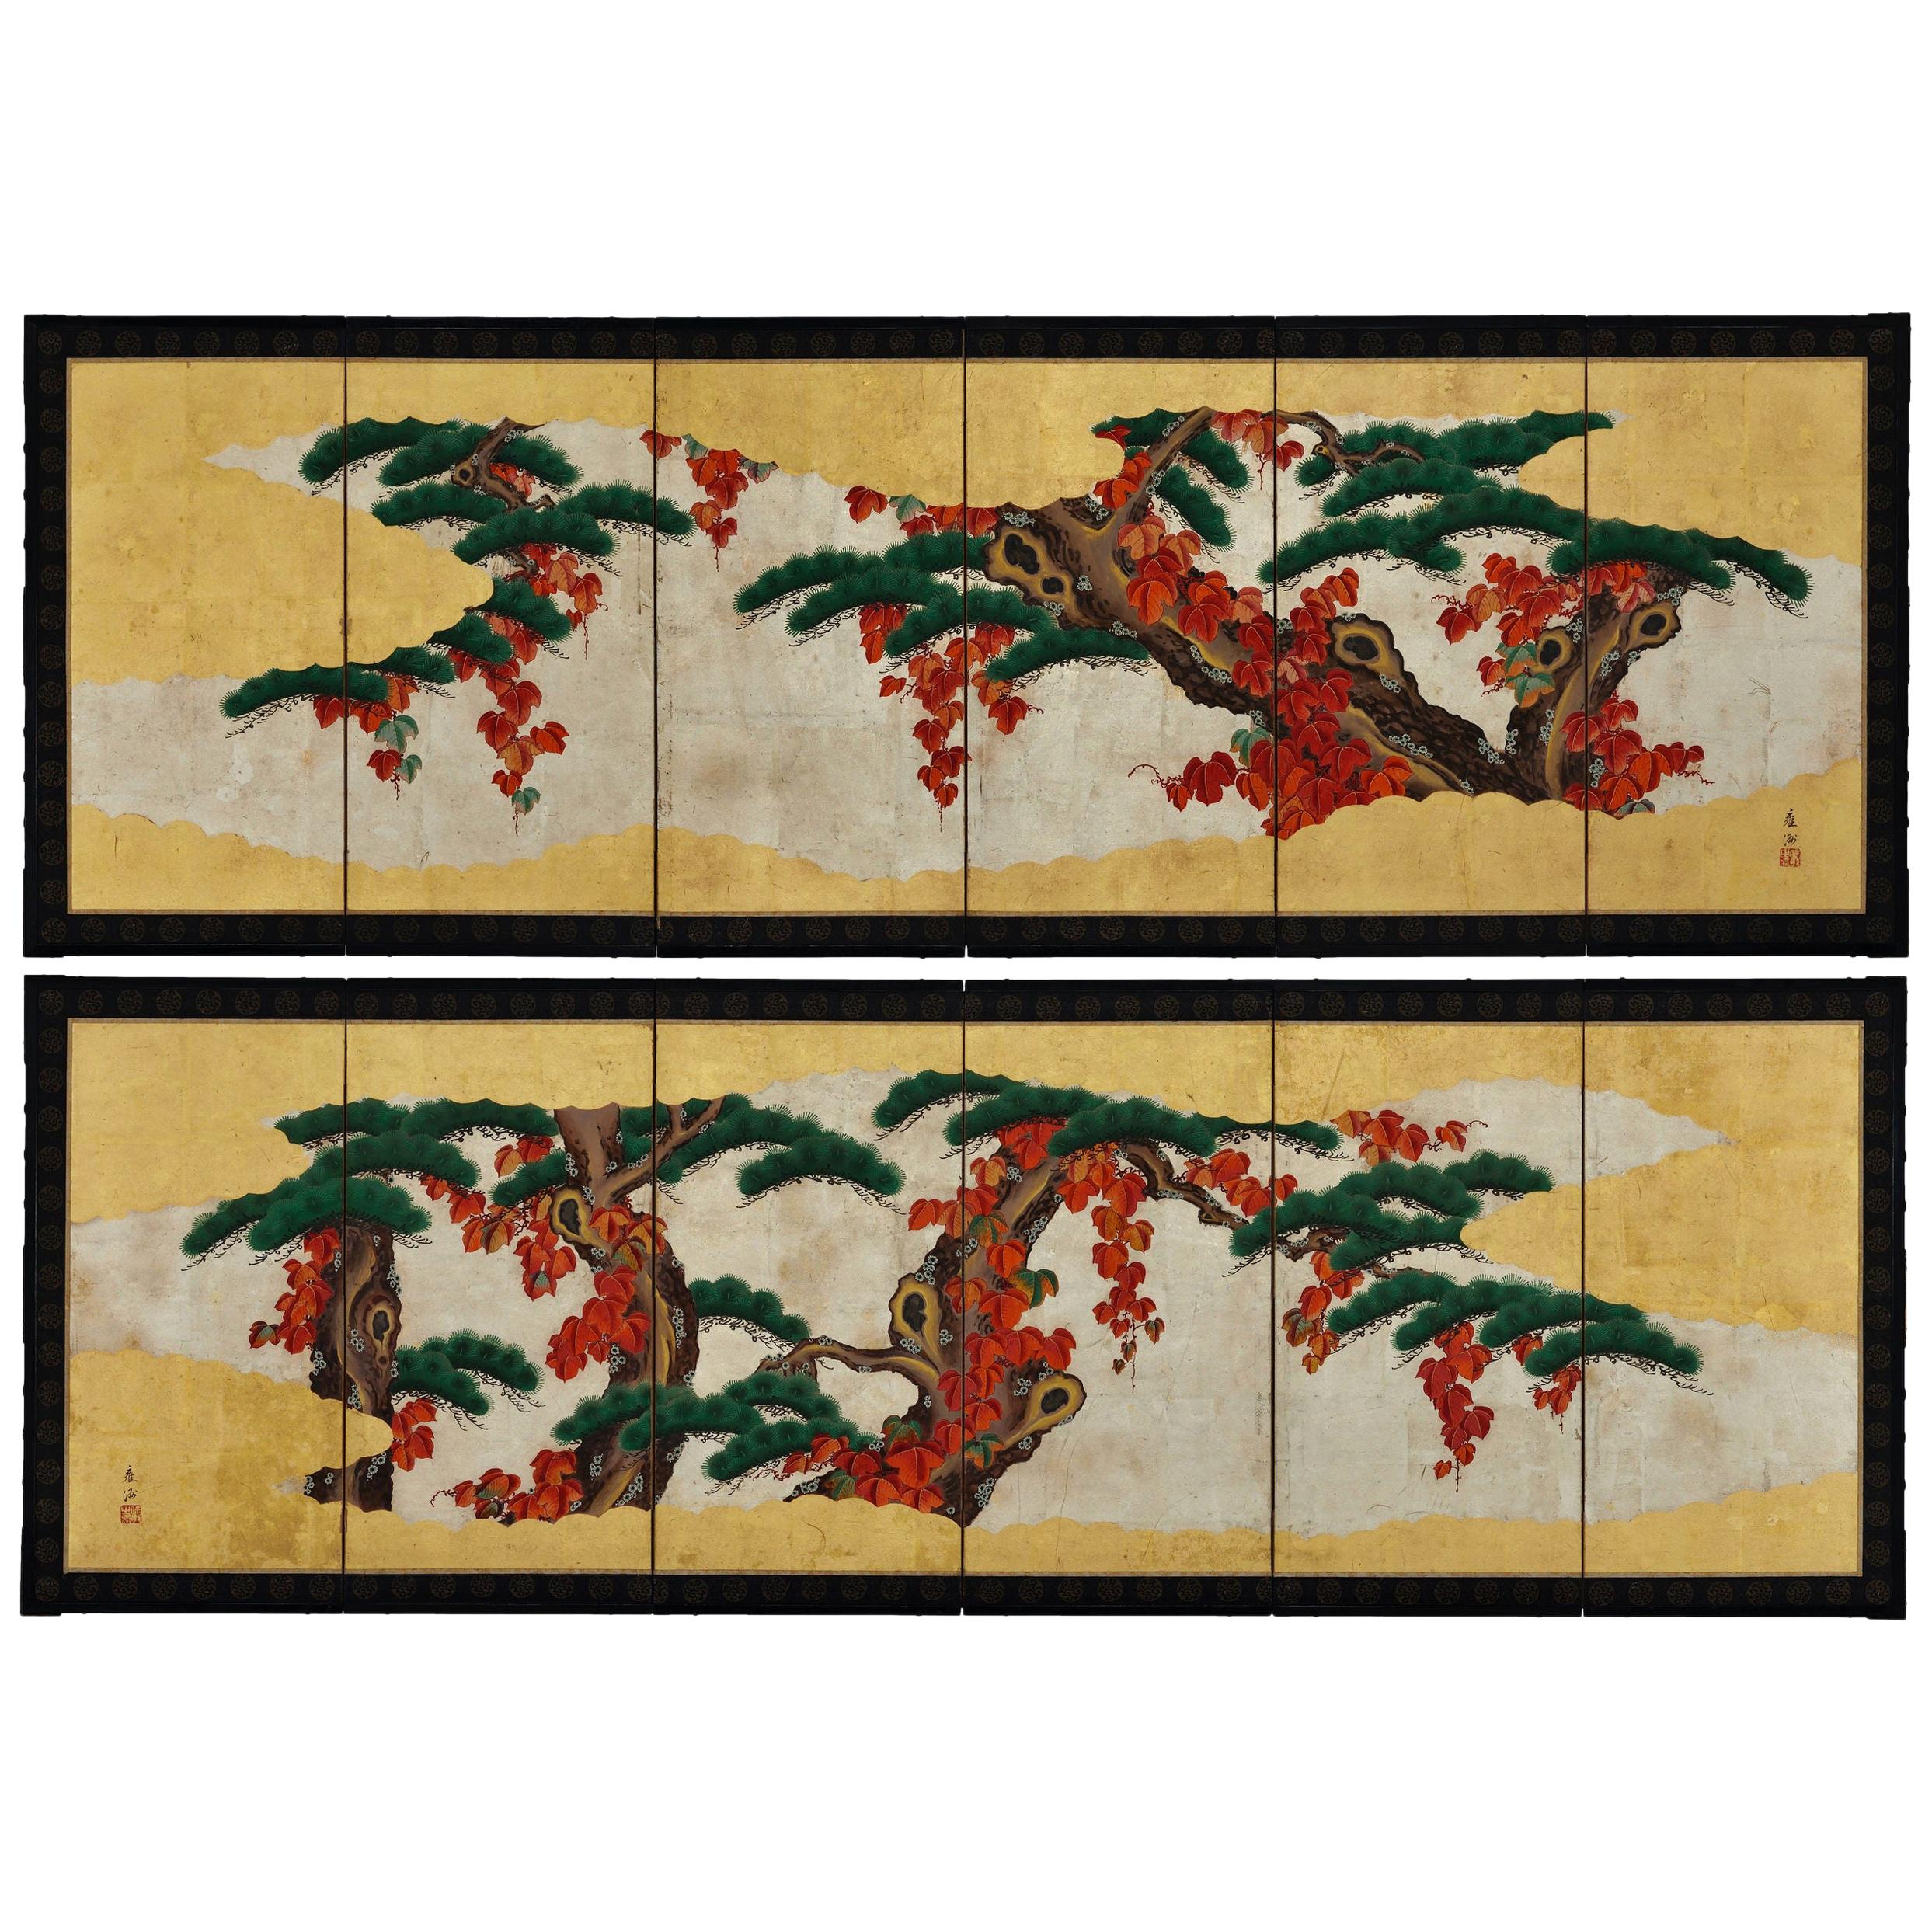 19th Century Small Japanese Screen Pair, Pine Trees and Vines on Gold Leaf